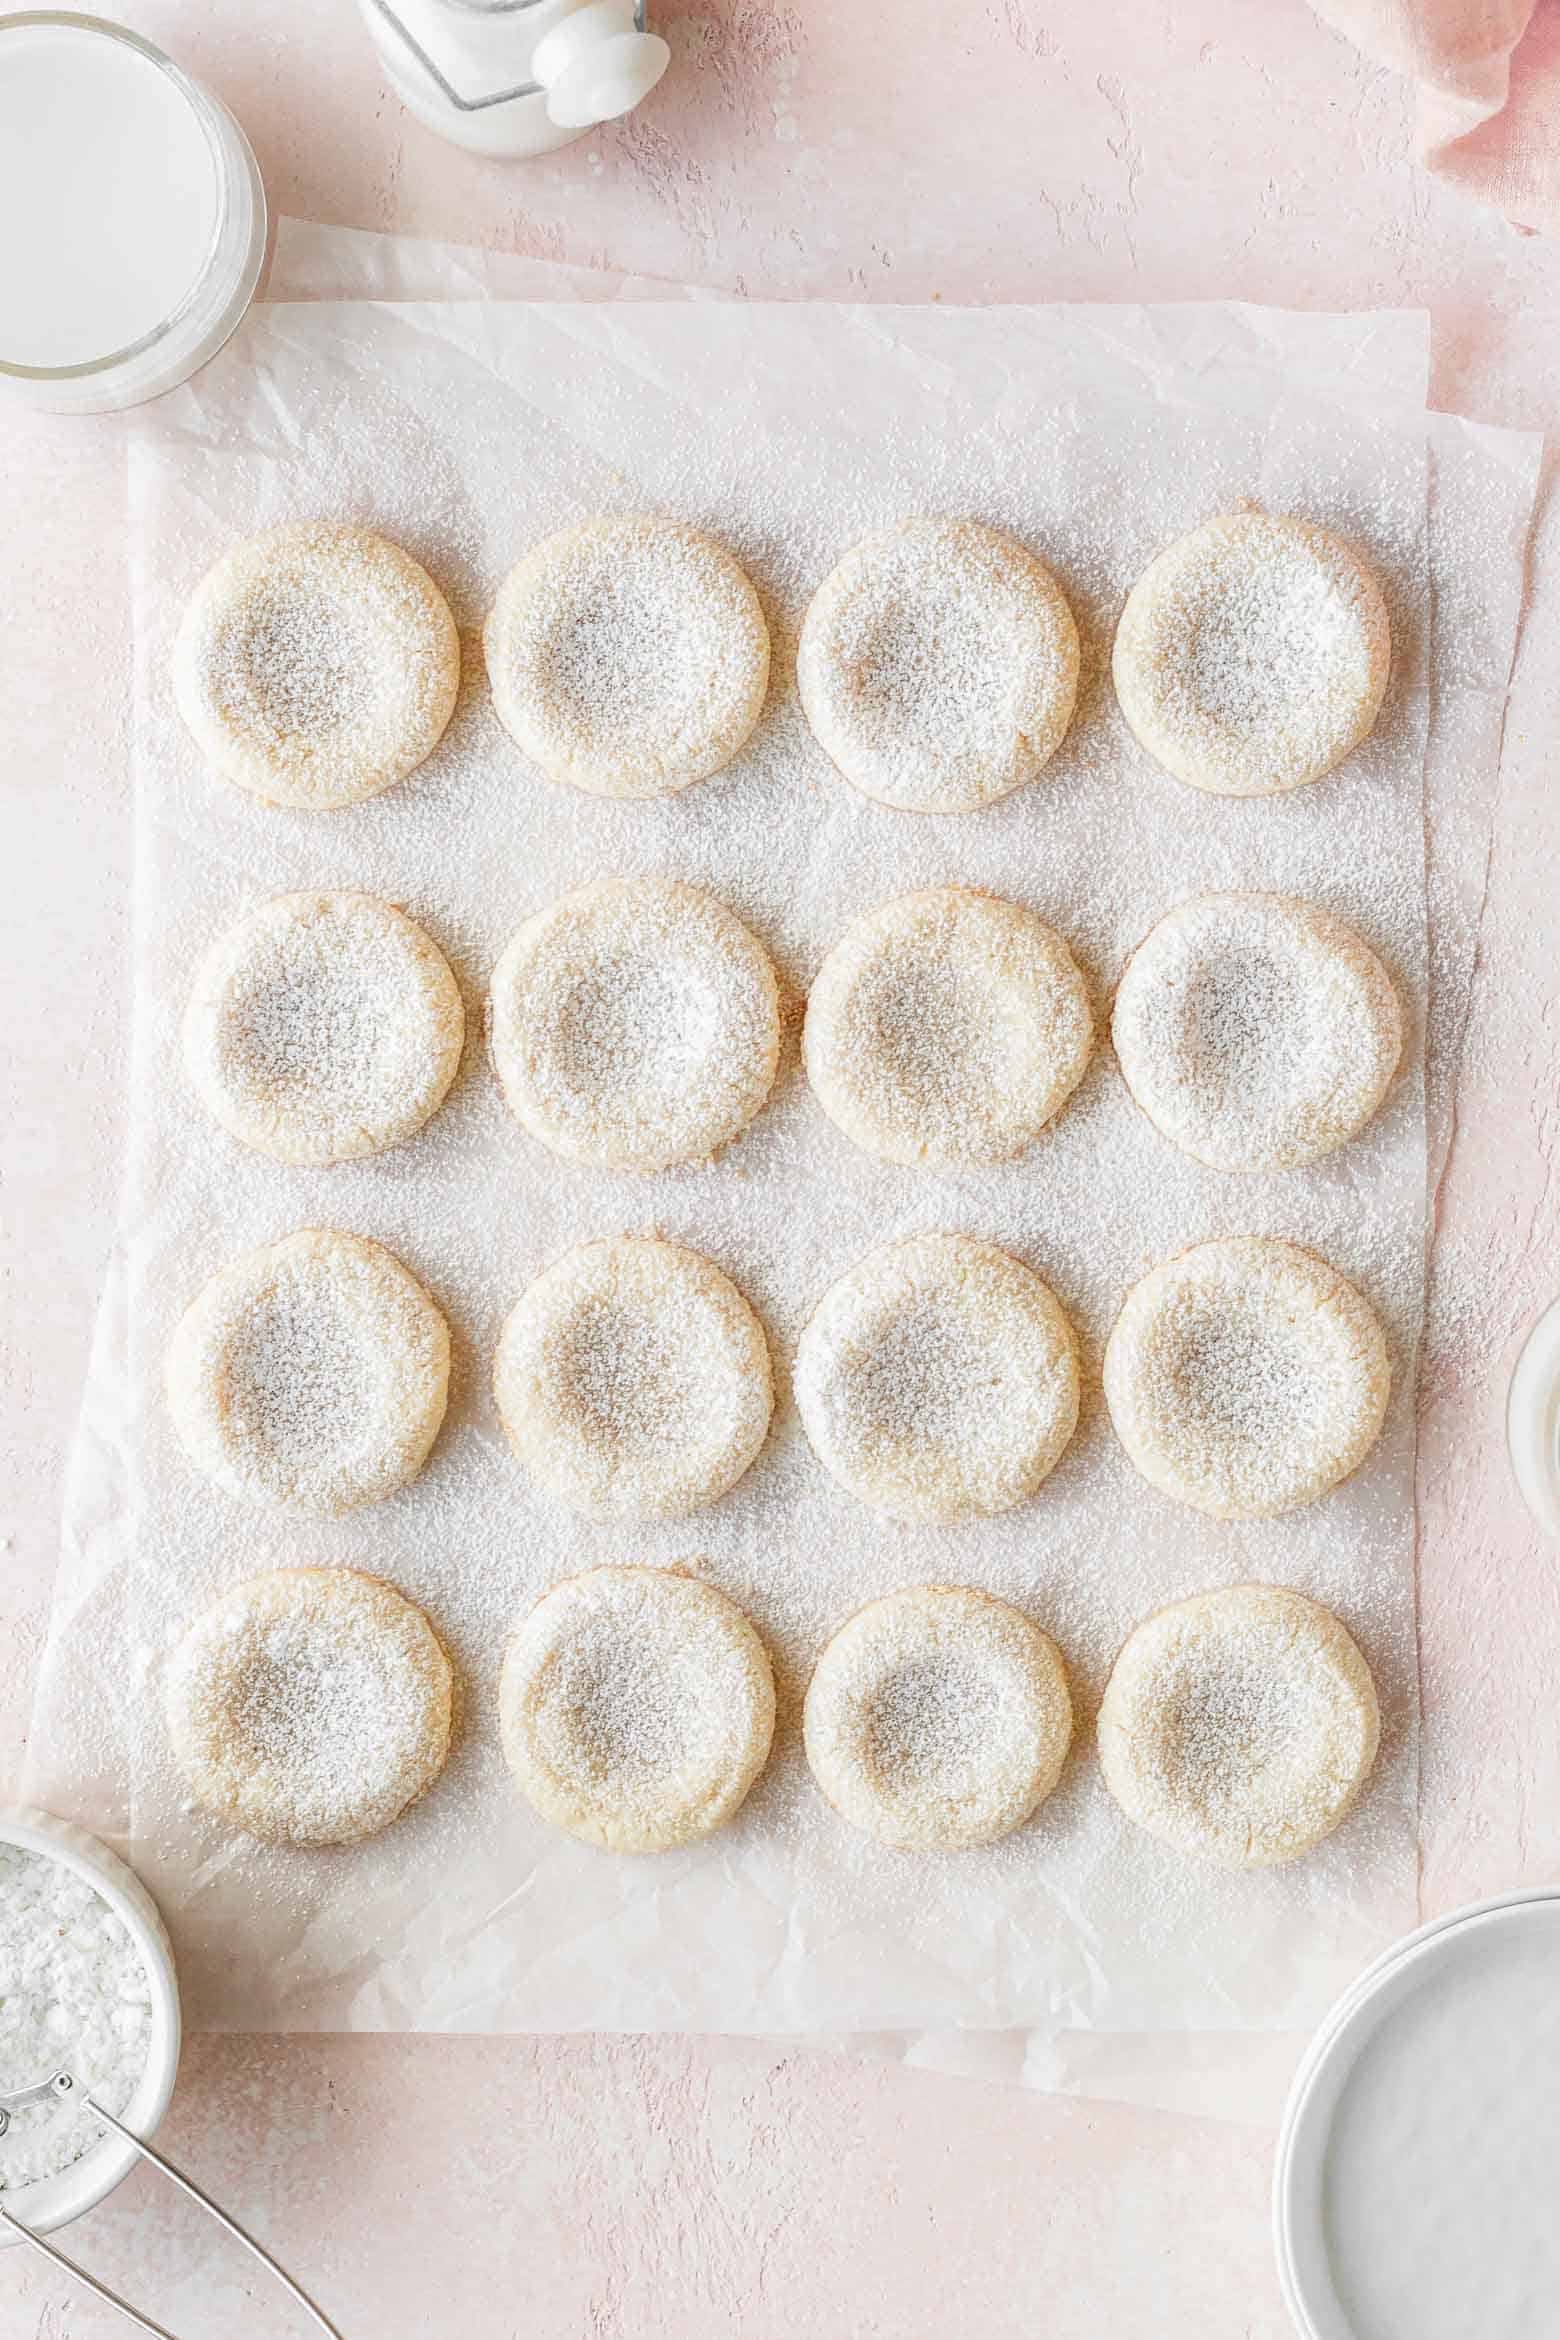 Vegan cookies dusted with powdered sugar